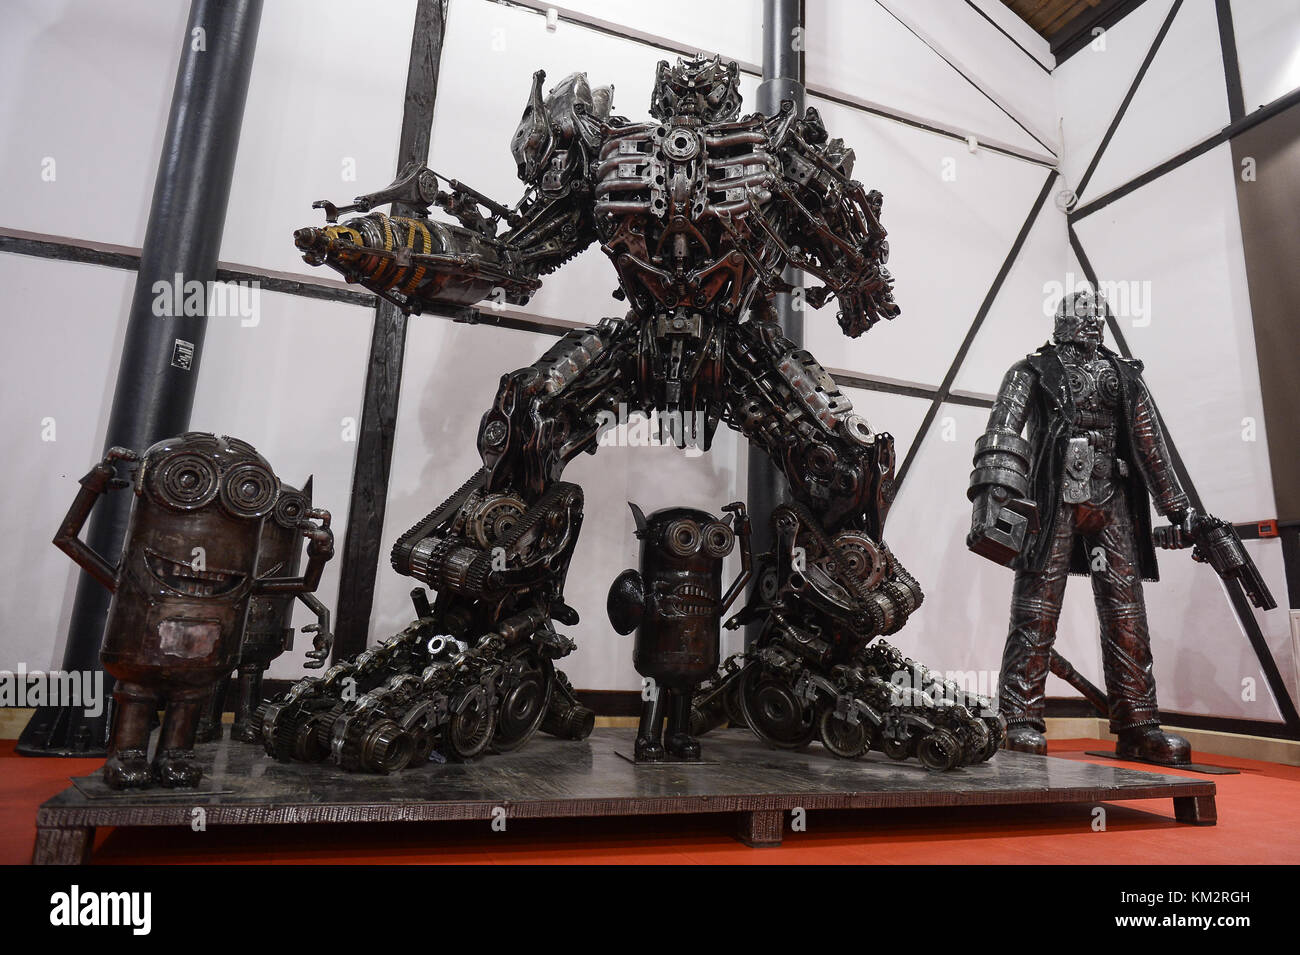 Krakow, Poland. 4th Dec, 2017. A scuplture of Transformer Megatron seen during the temporary exhibition called 'Gallery of Steel Figures' at the Museum of Municipal Engineering in Krakow. The exhibition of Steel Figures is inspired by the study of Madame Tussauds Wax Museum in London. Credit: Omar Marques/SOPA/ZUMA Wire/Alamy Live News Stock Photo